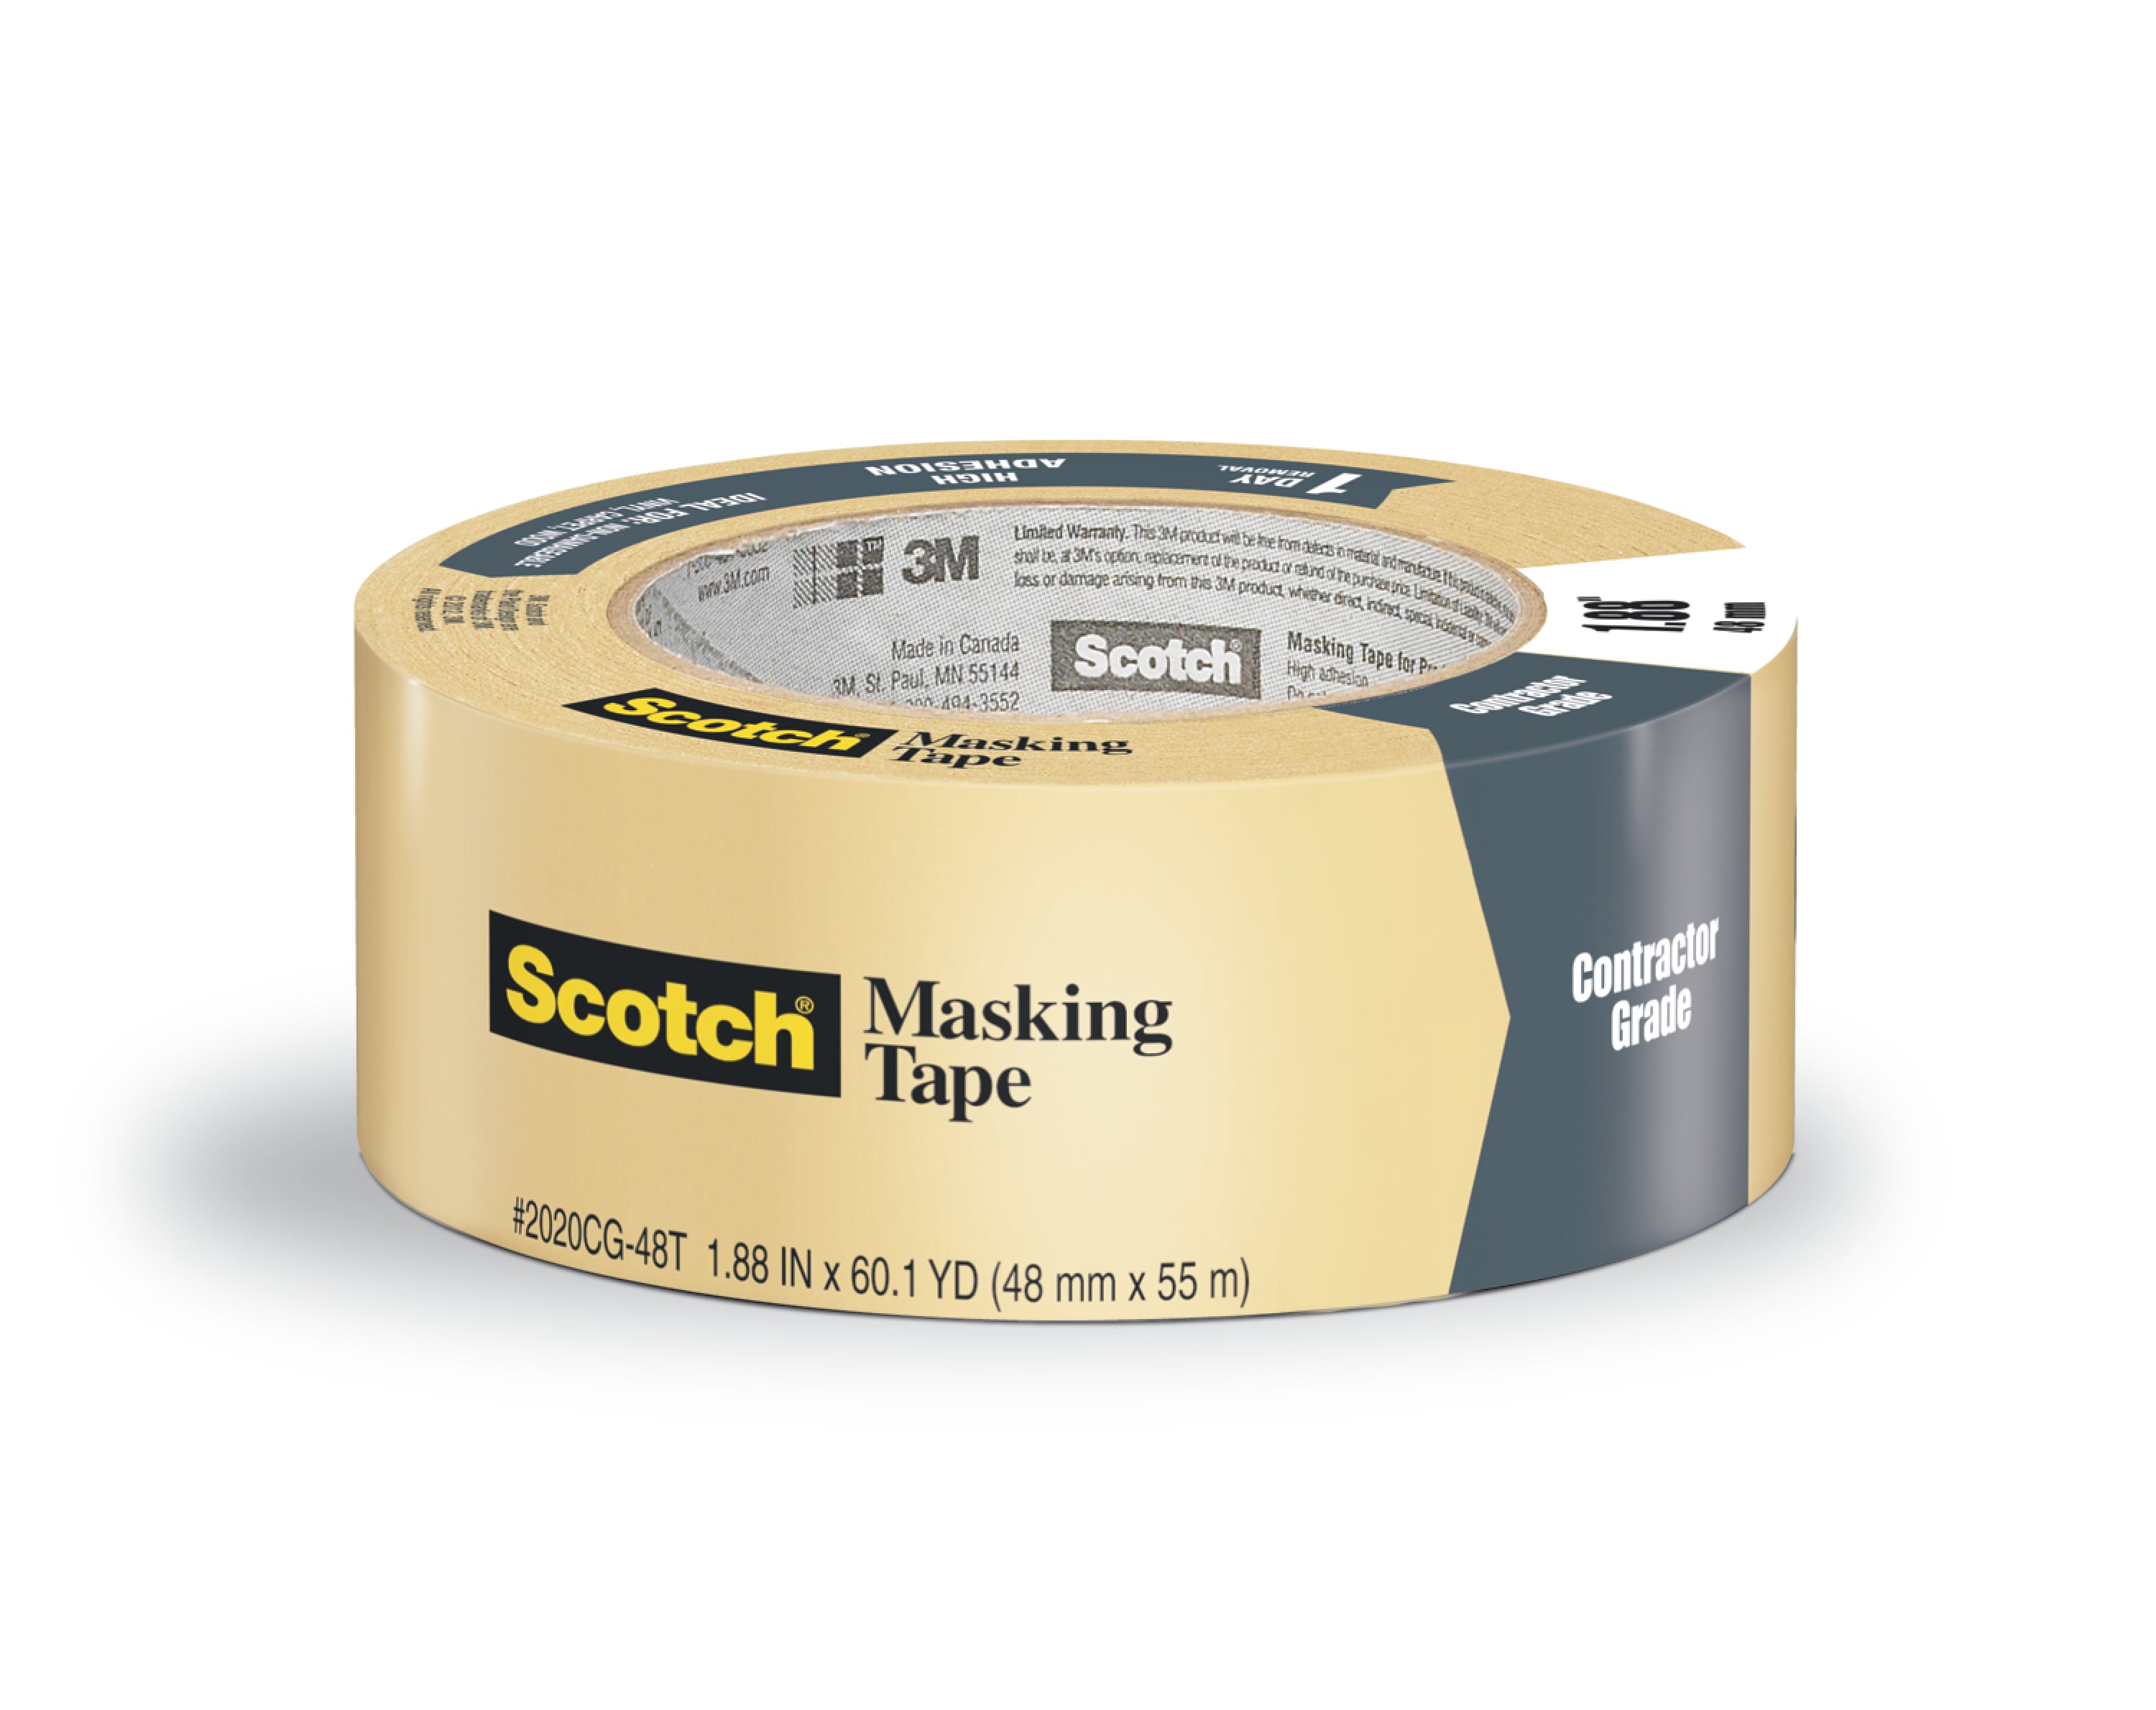 3M Scotch 1.41 in. x 60.1 yds. Masking Tape for Hard-to-Stick